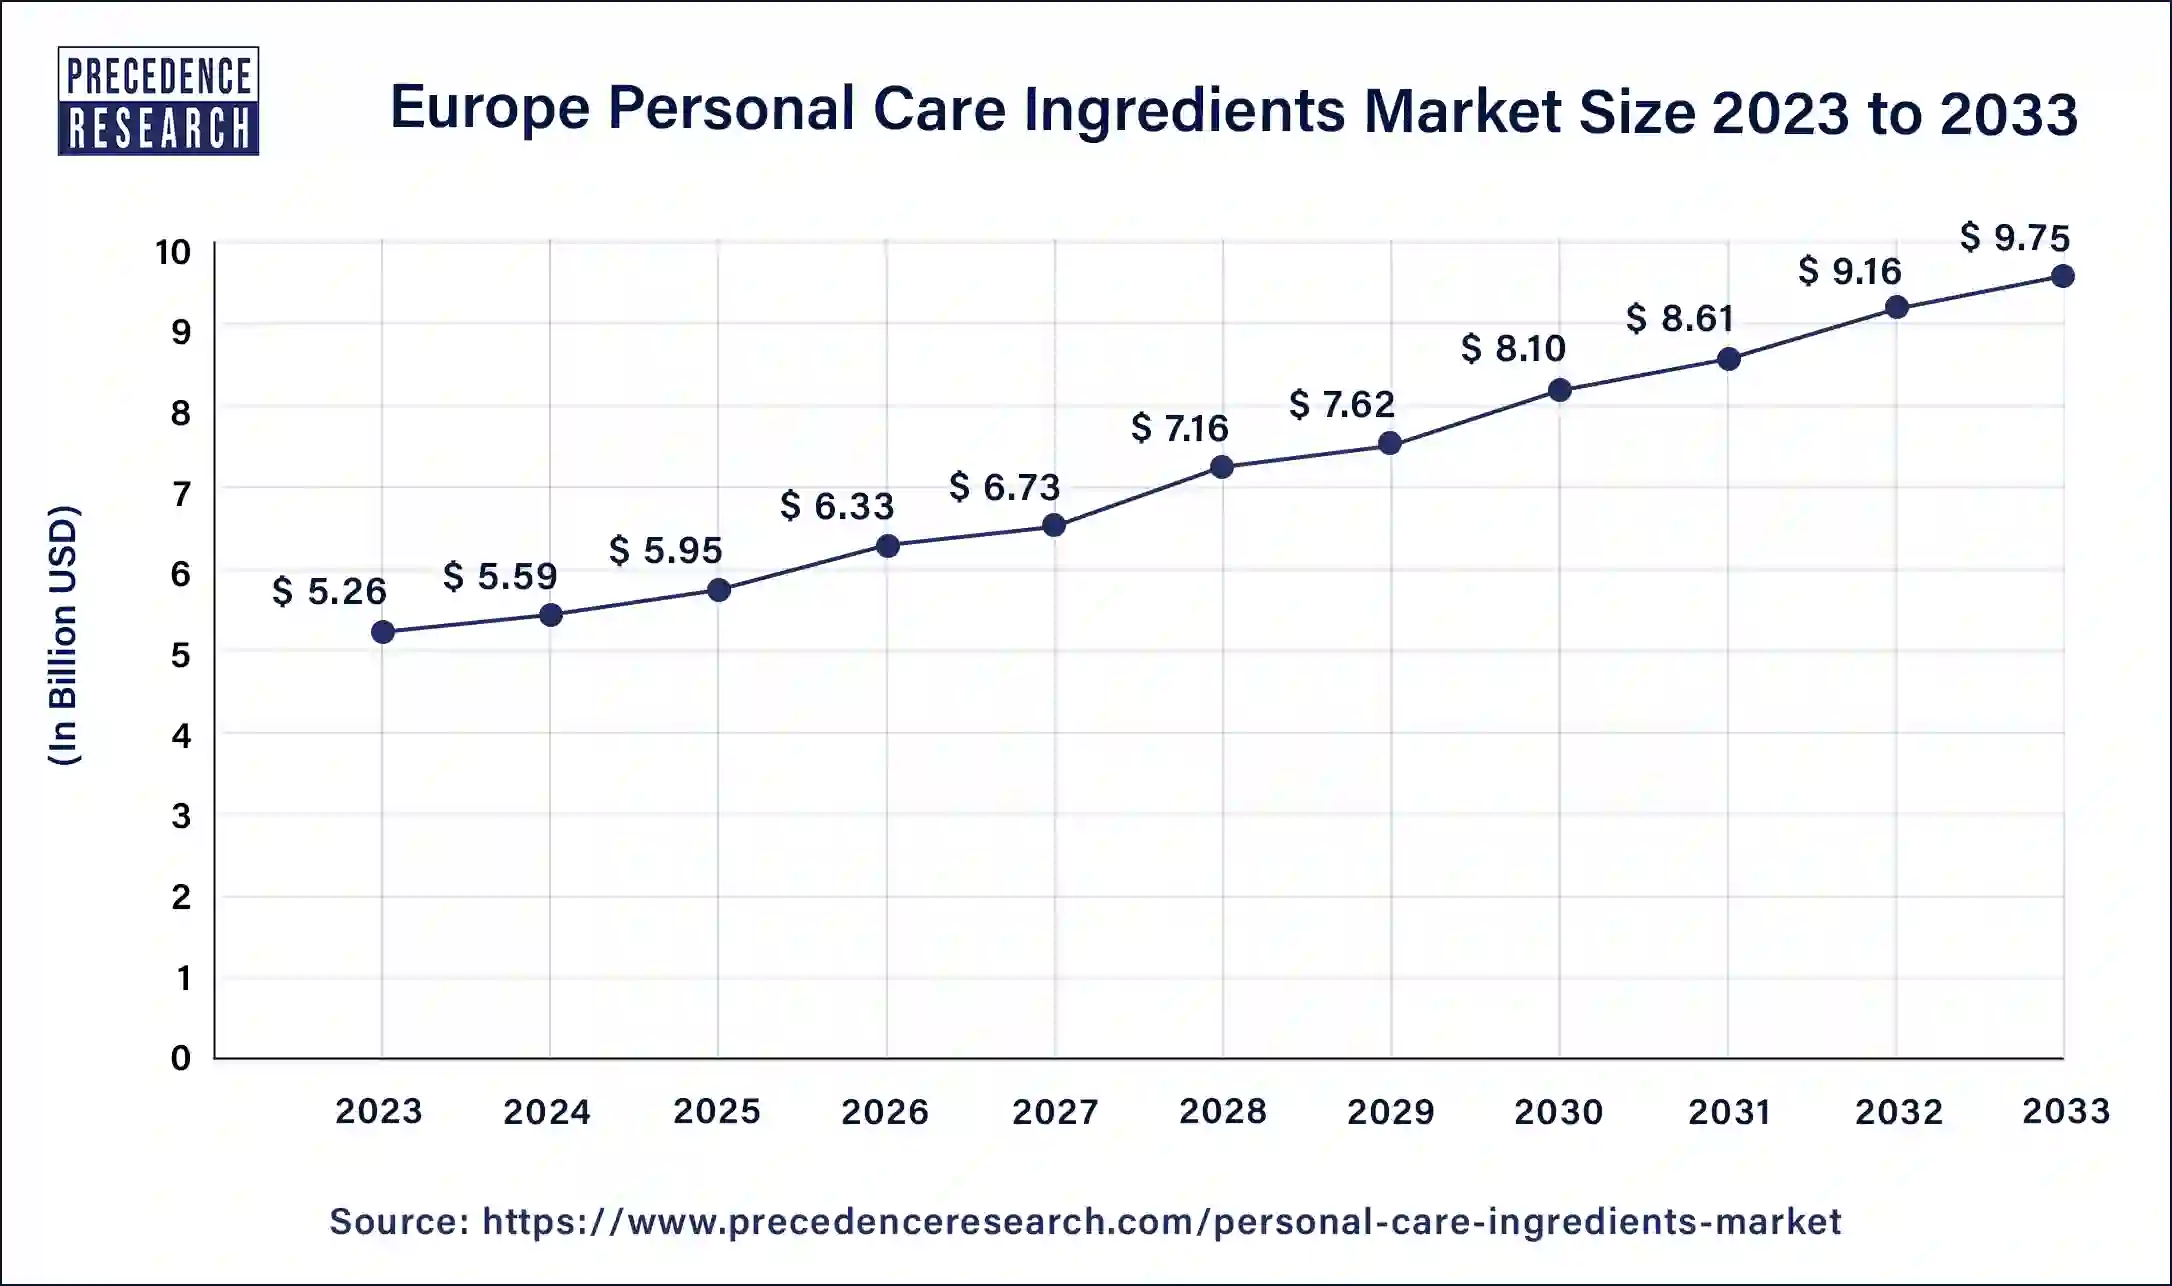 Europe Personal Care Ingredients Market Size 2024 to 2033